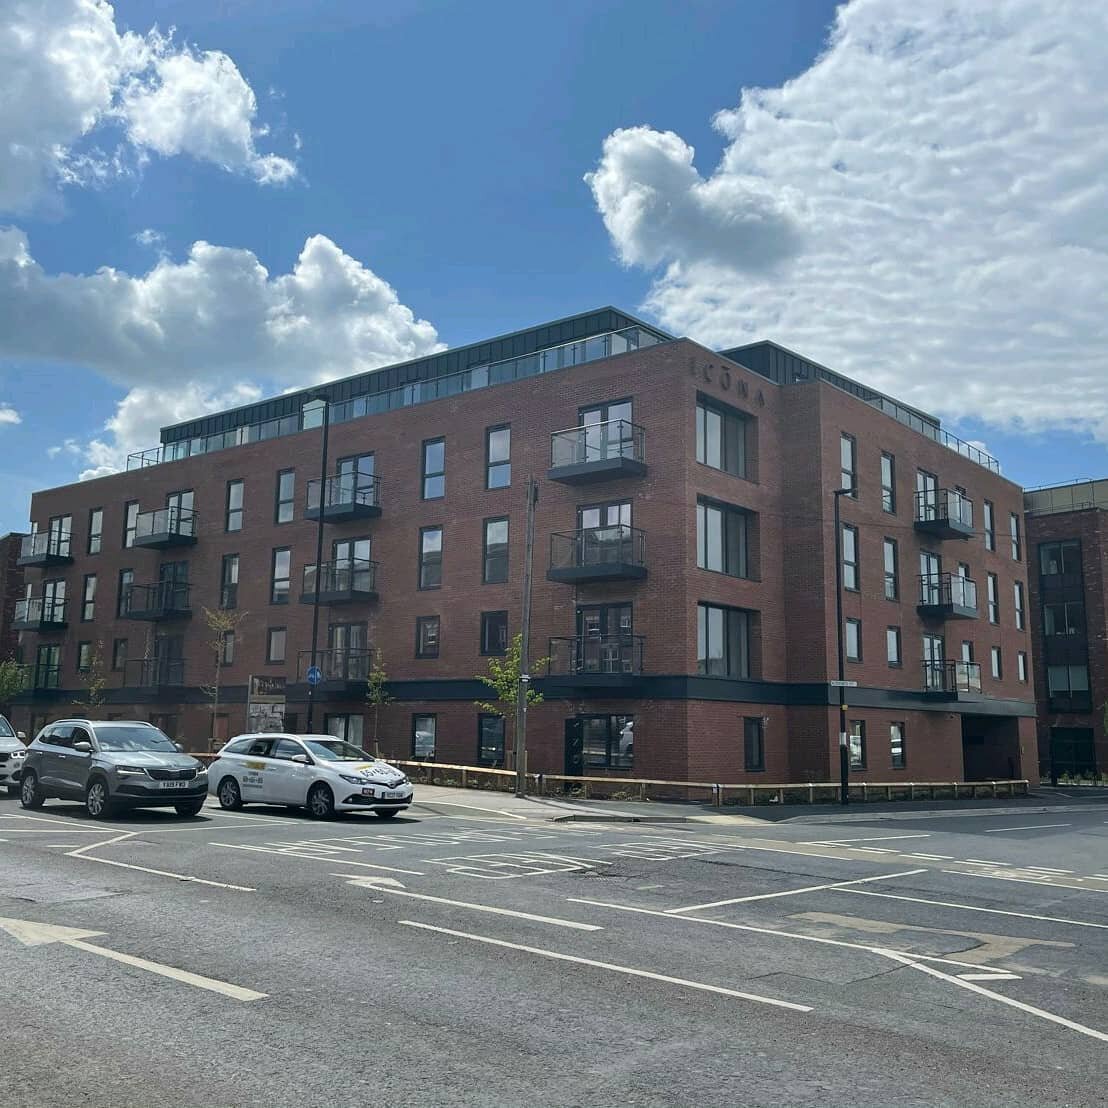 After our site visit yesterday to agree brick samples for our Icona 2 residential apartments in York, we popped round to see Icona 1 we completed recently for @modernistiqdevelopment!

Sitting pretty in the sun (and rain). 

#architectsuk #york #resi